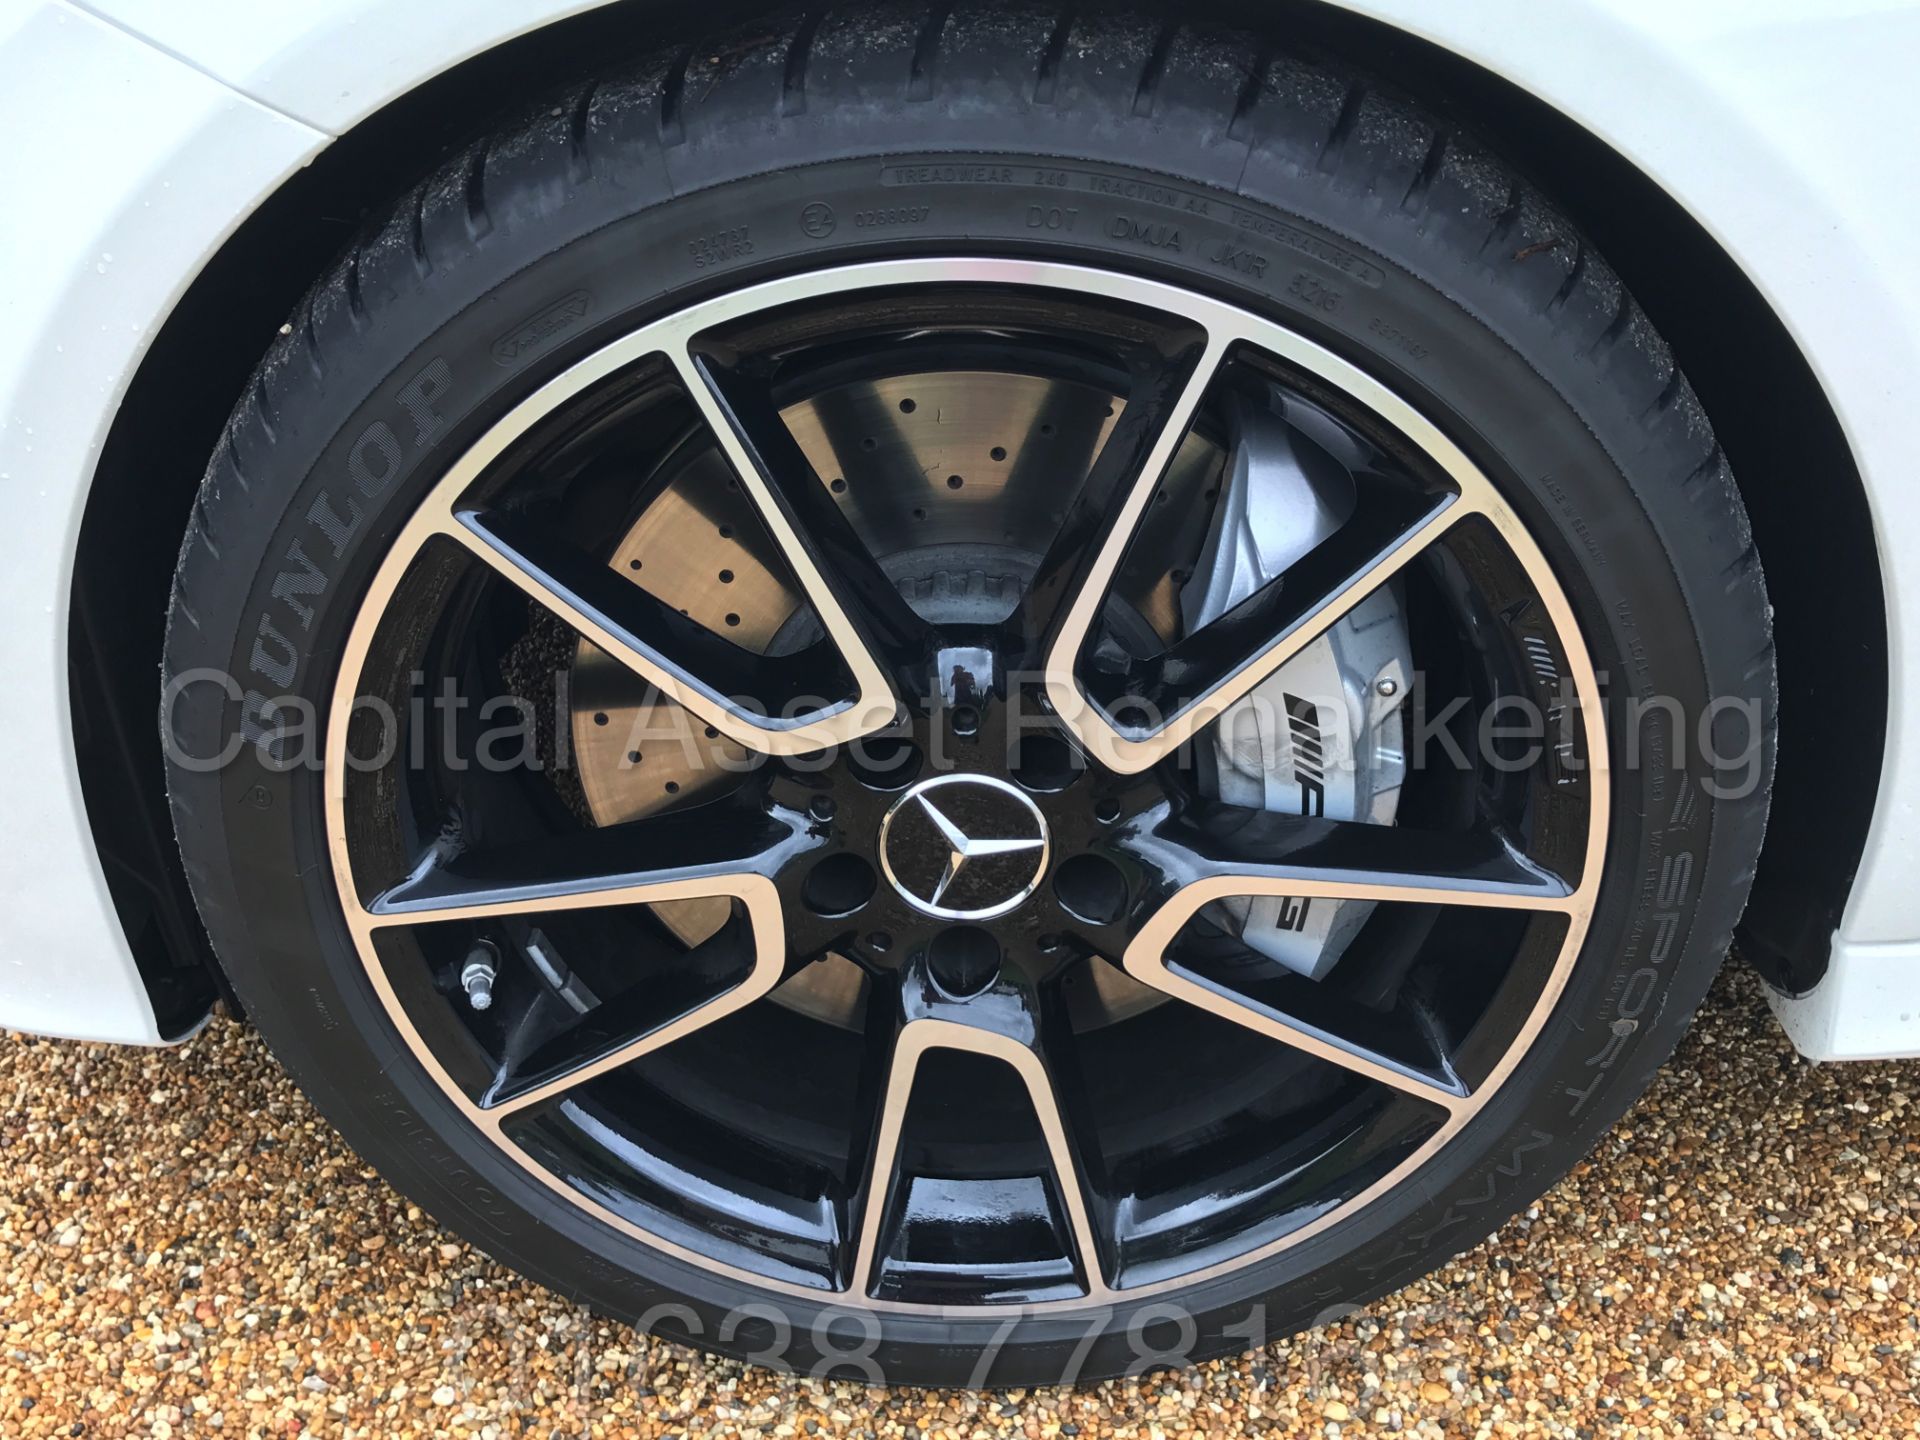 MEREDES-BENZ C43 AMG PREMIUM '4 MATIC' COUPE (2017) '9-G AUTO - LEATHER - SAT NAV' **FULLY LOADED** - Image 21 of 57